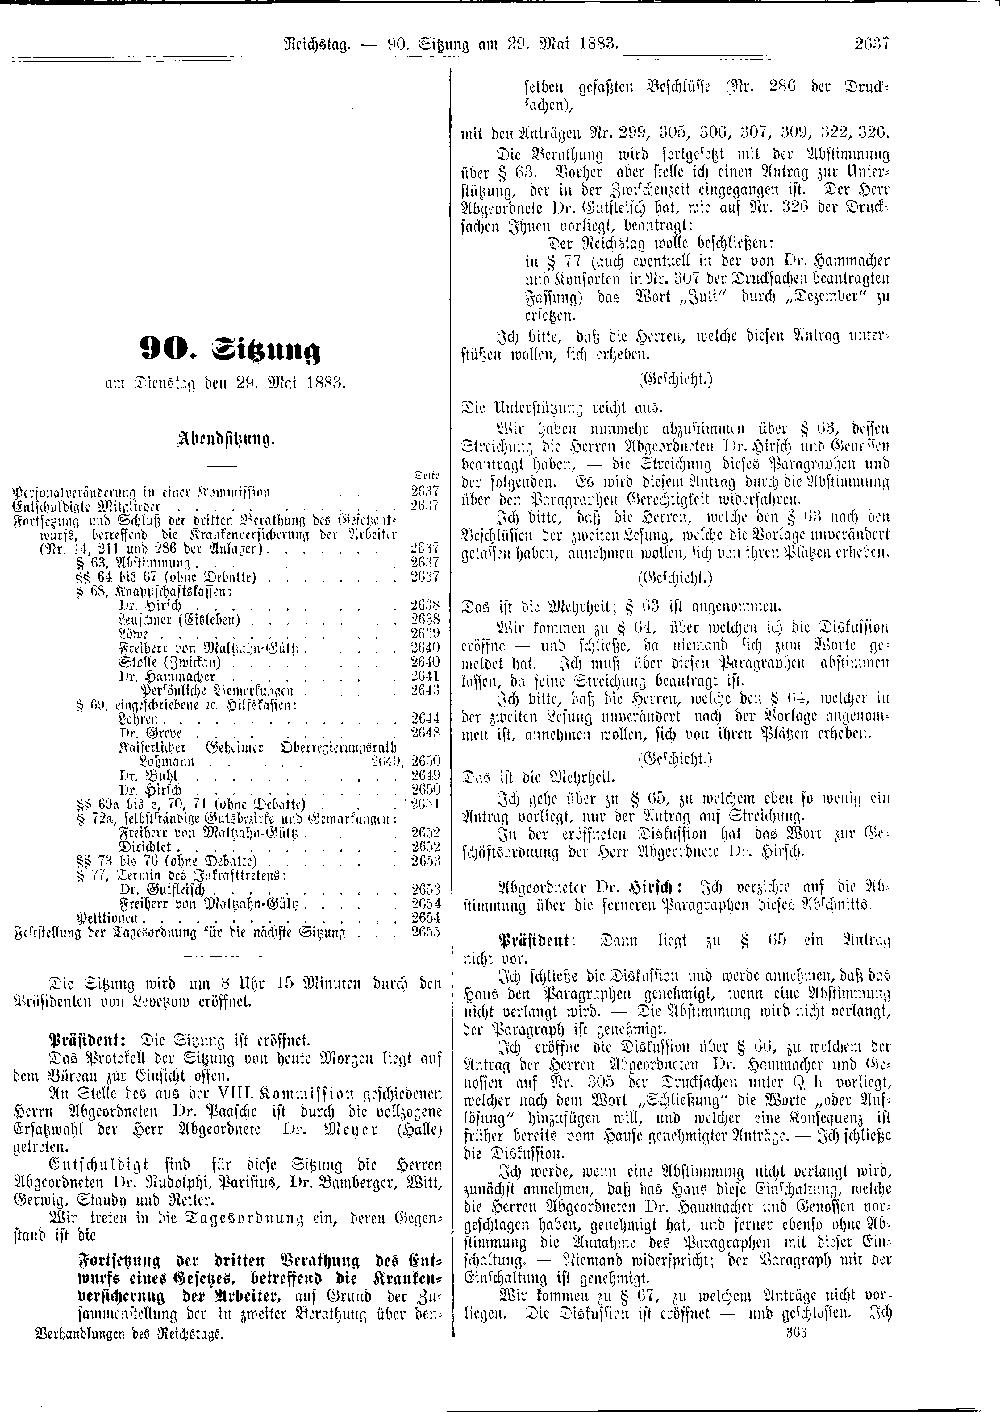 Scan of page 2637